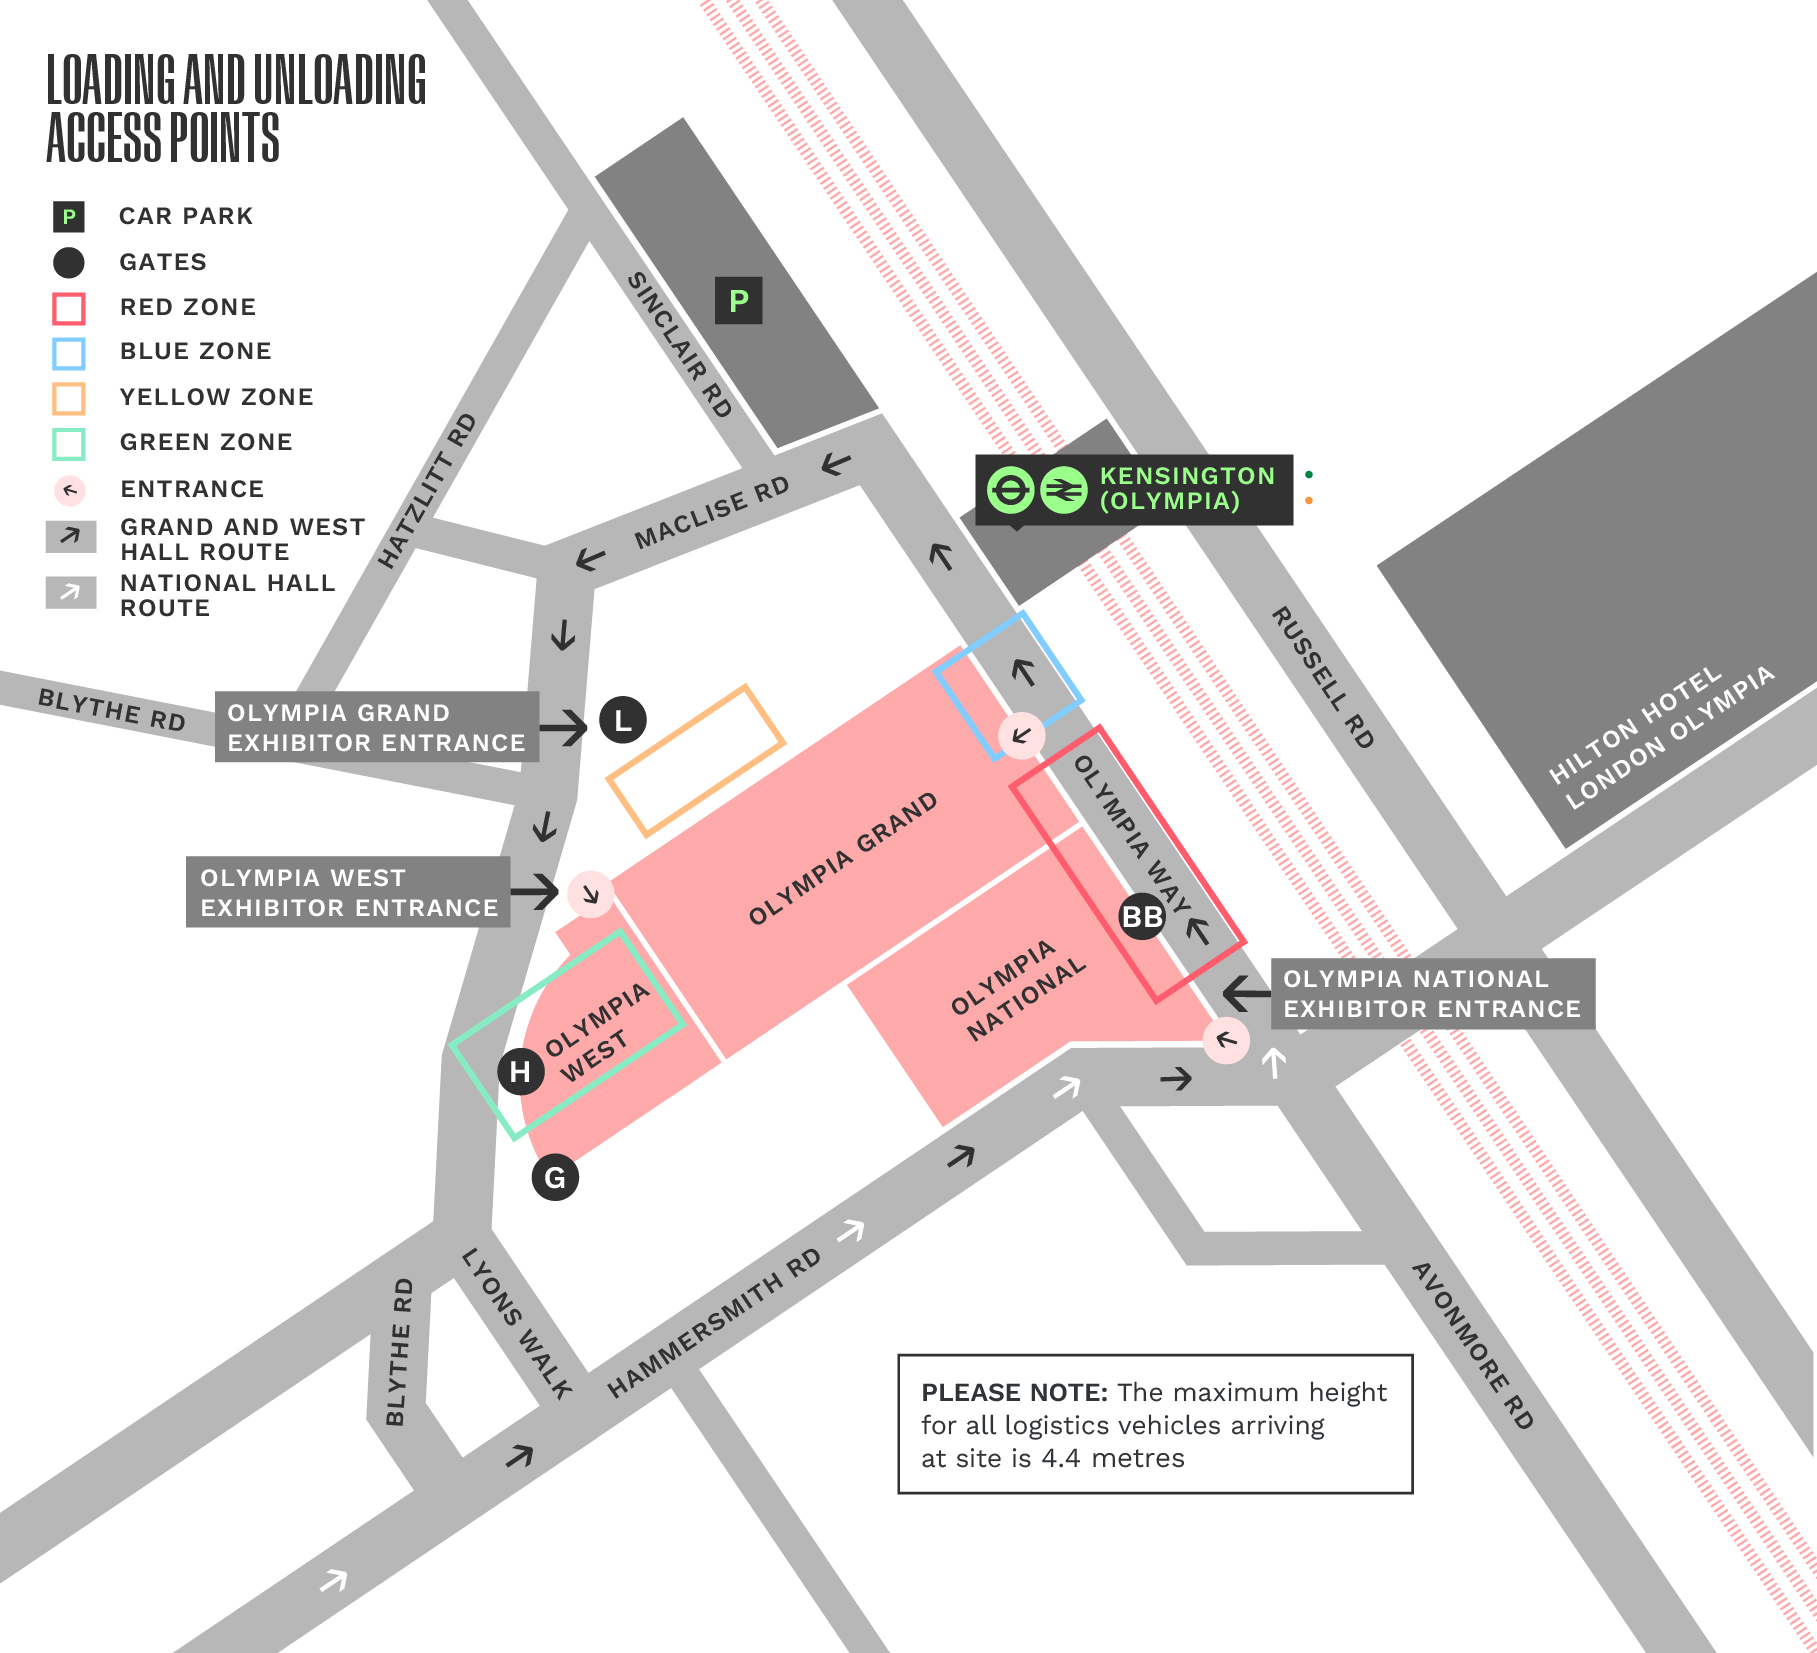 Map of Olympia Events loading and unloading access points